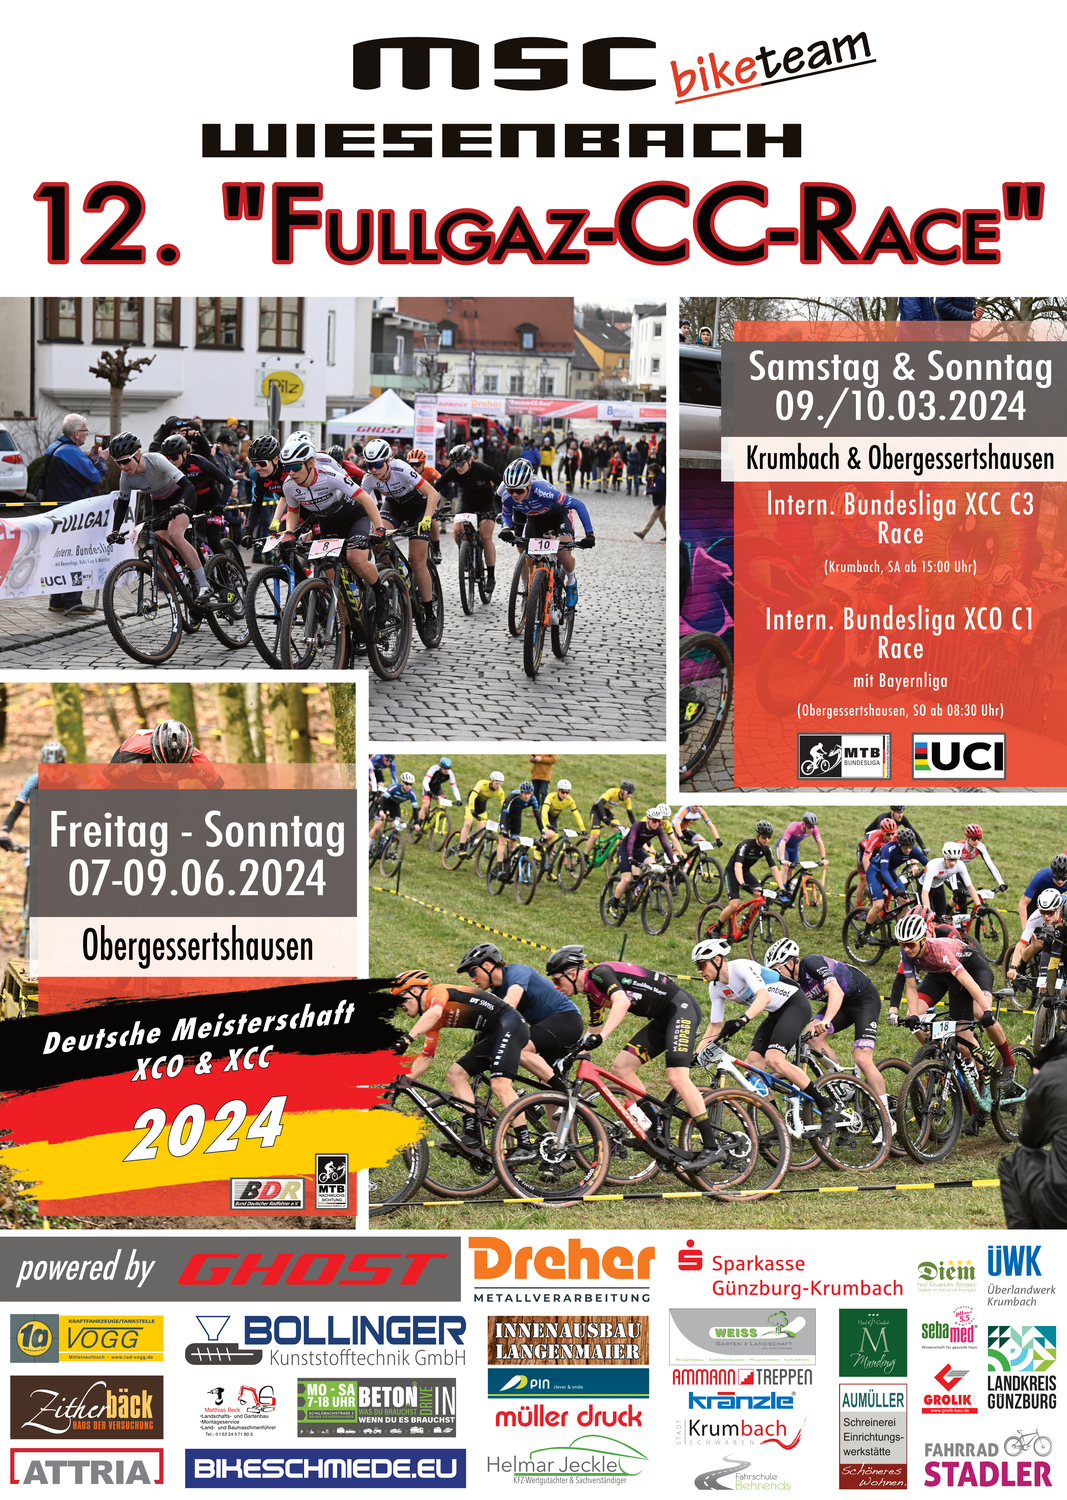 Save the Date - Fullgaz Race 2024